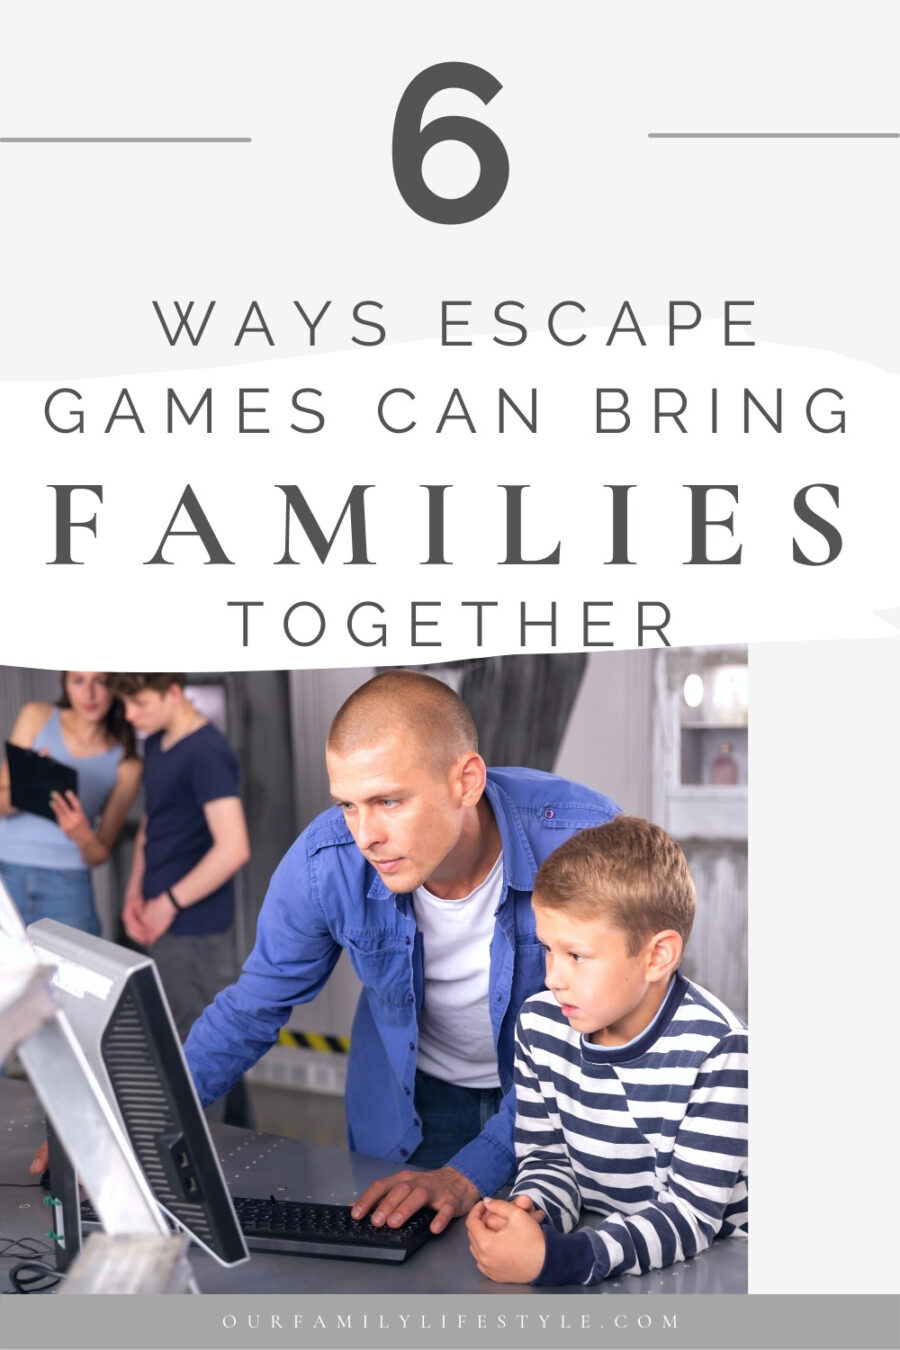 6 Ways Escape Games Can Bring a Family Together